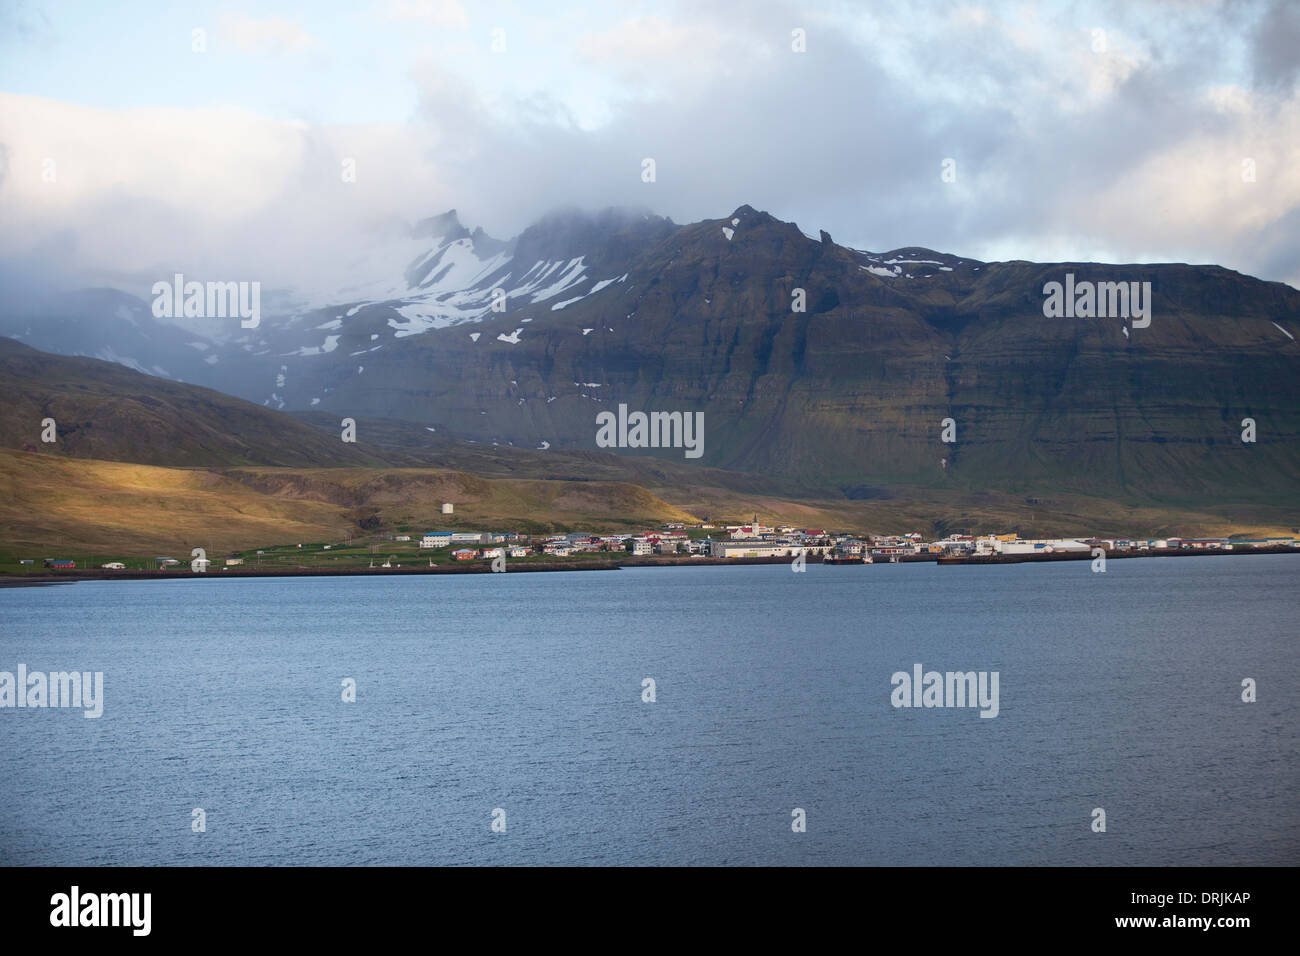 View of the mountain peak of Iceland with the sea and a city below Stock Photo